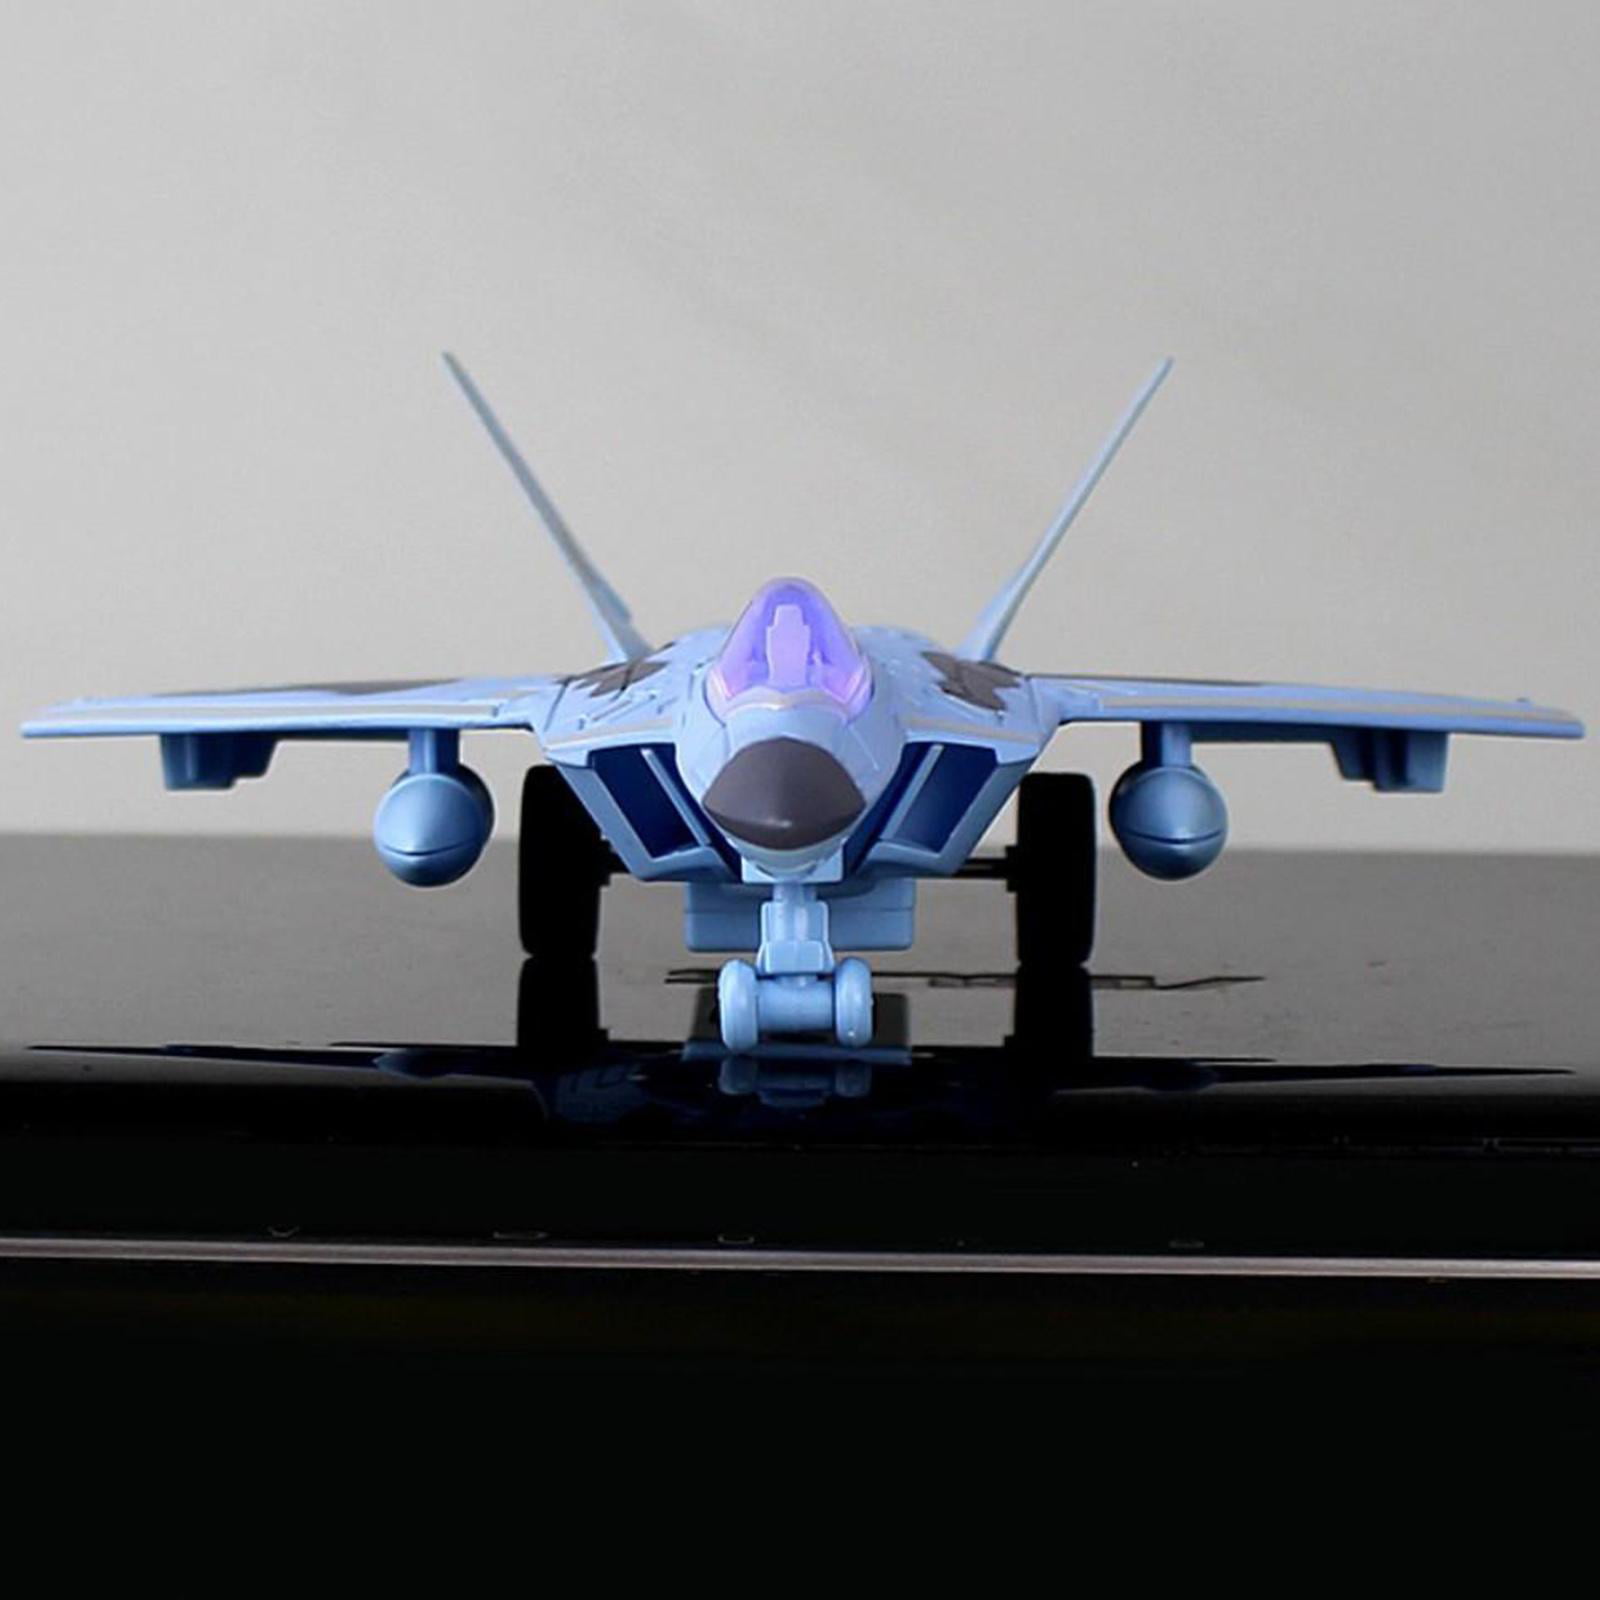 Details about   F-22 Raptor Aircraft Alloy Model w/ Plastic Stand Sound and Music Decor 